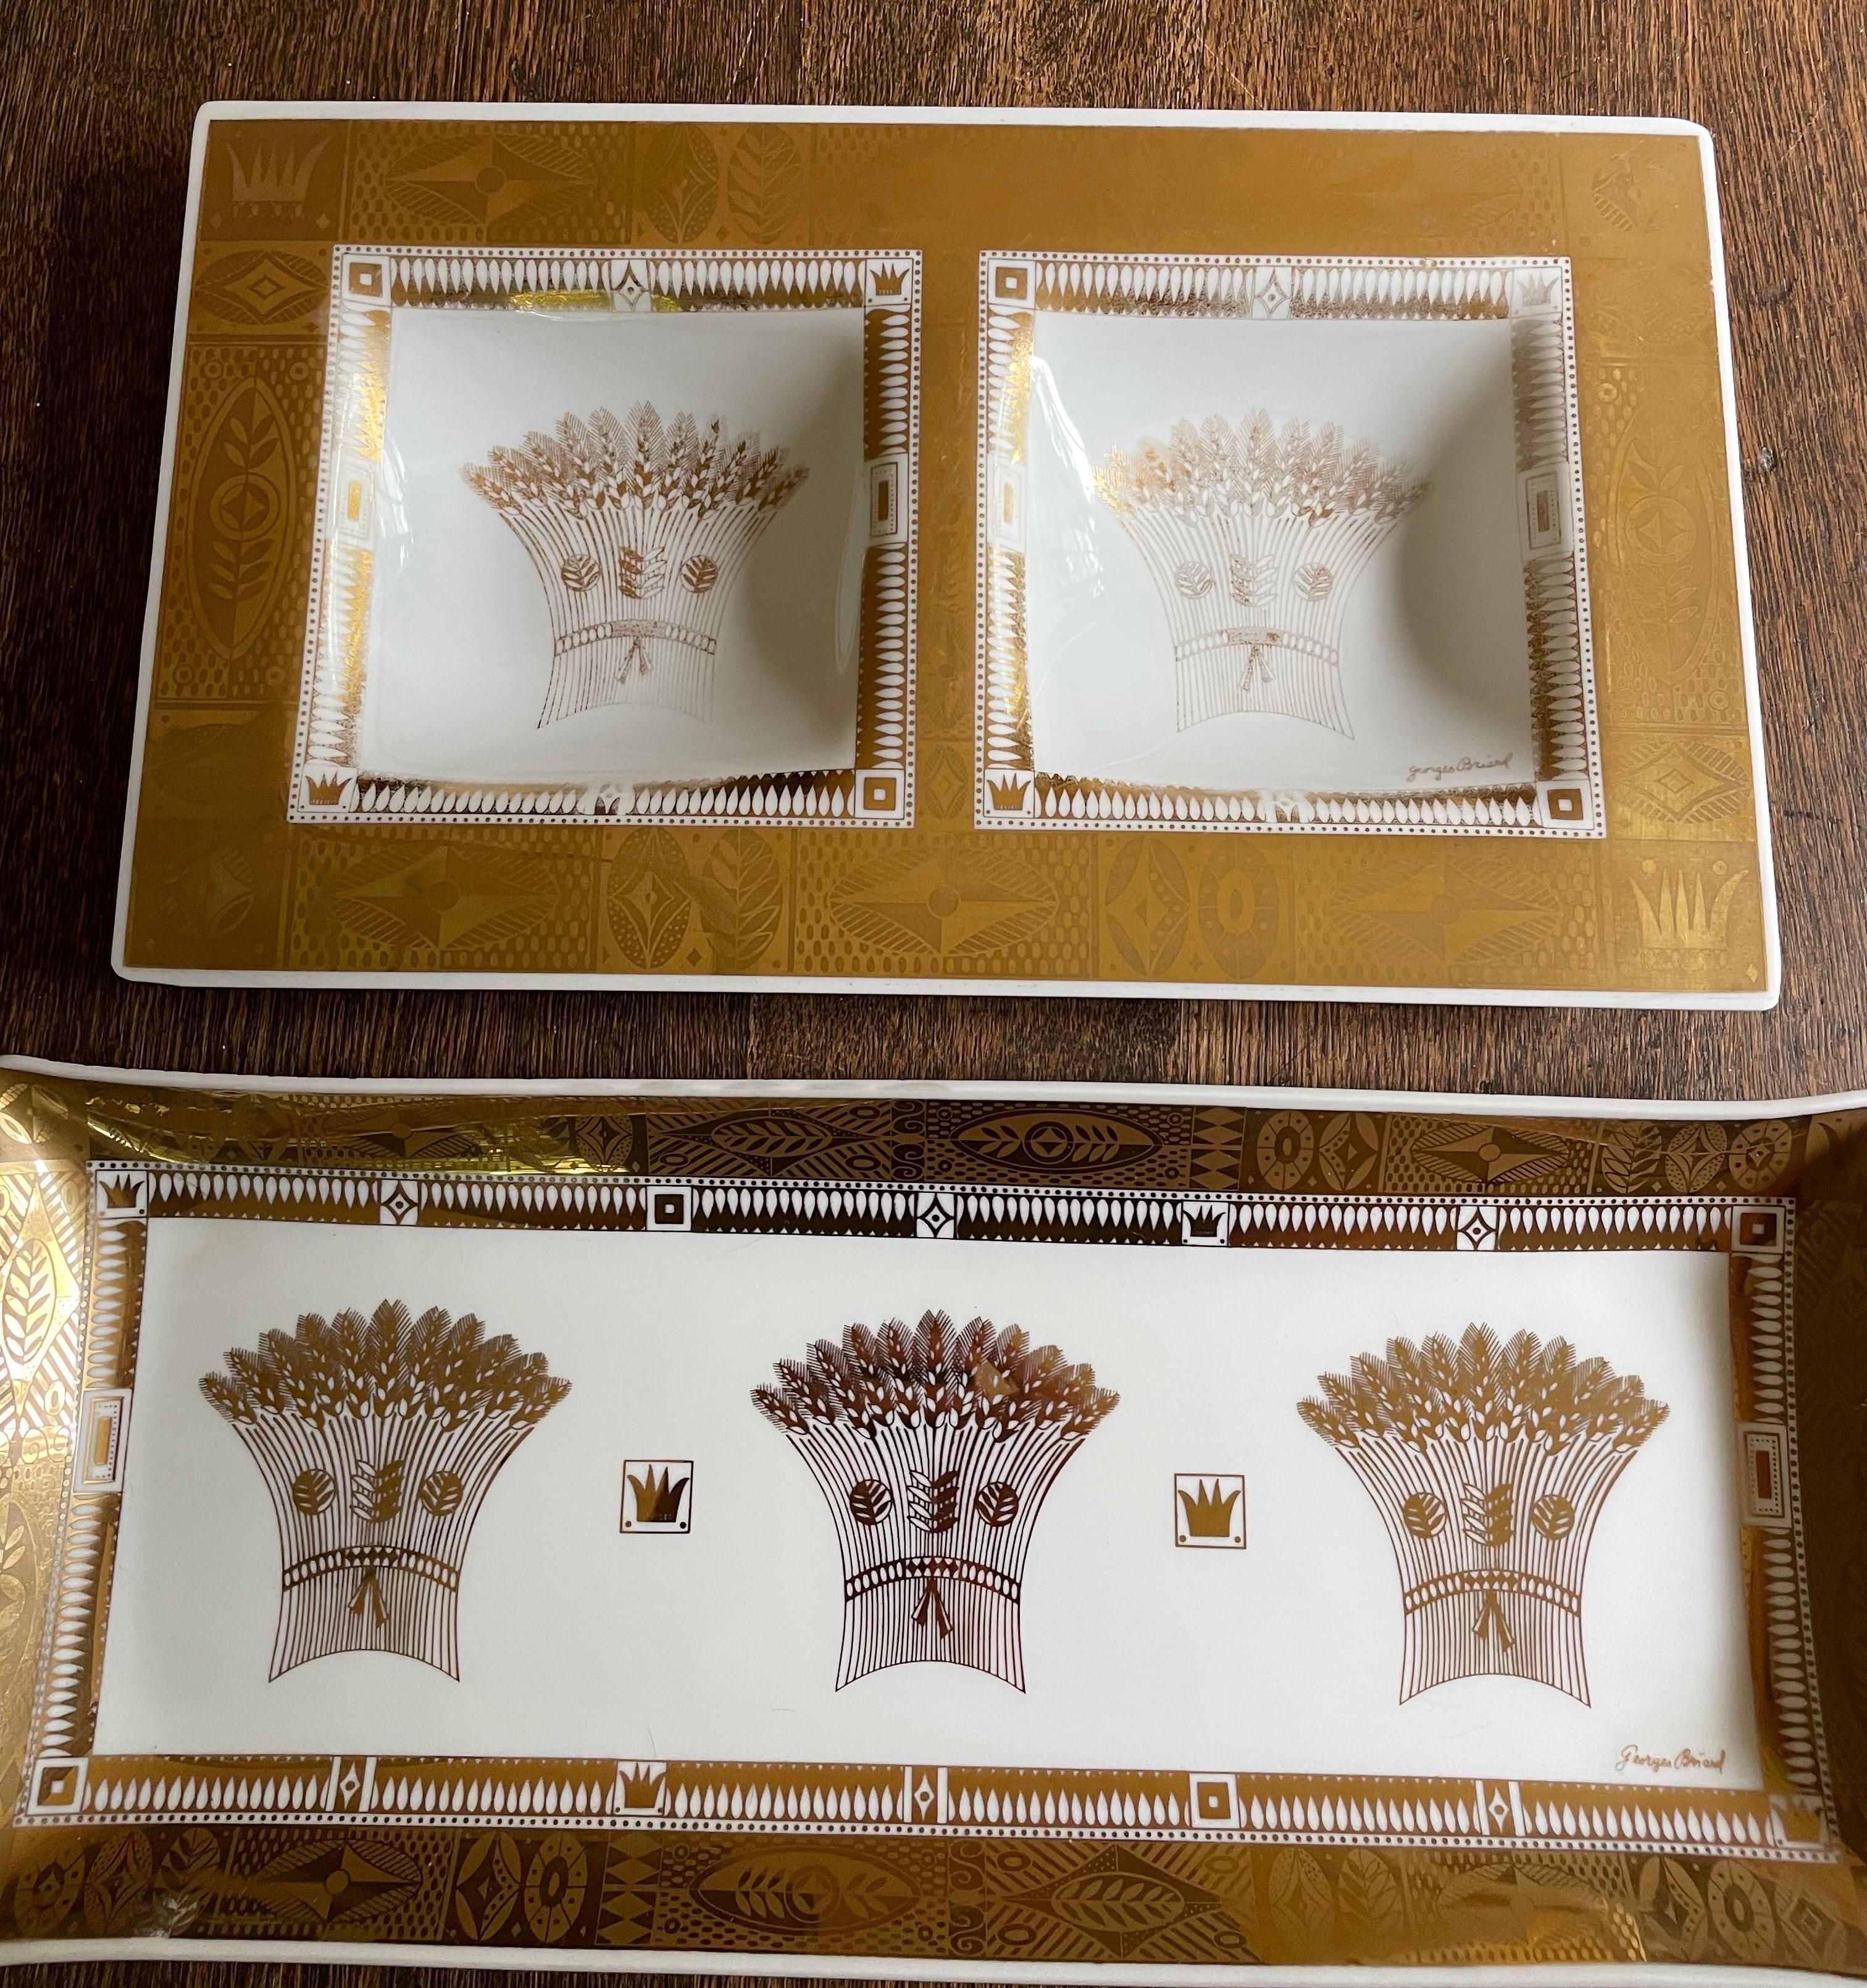 Beautiful pair of Georges Briard milk glass serving trays with gold leaf harvest accents.